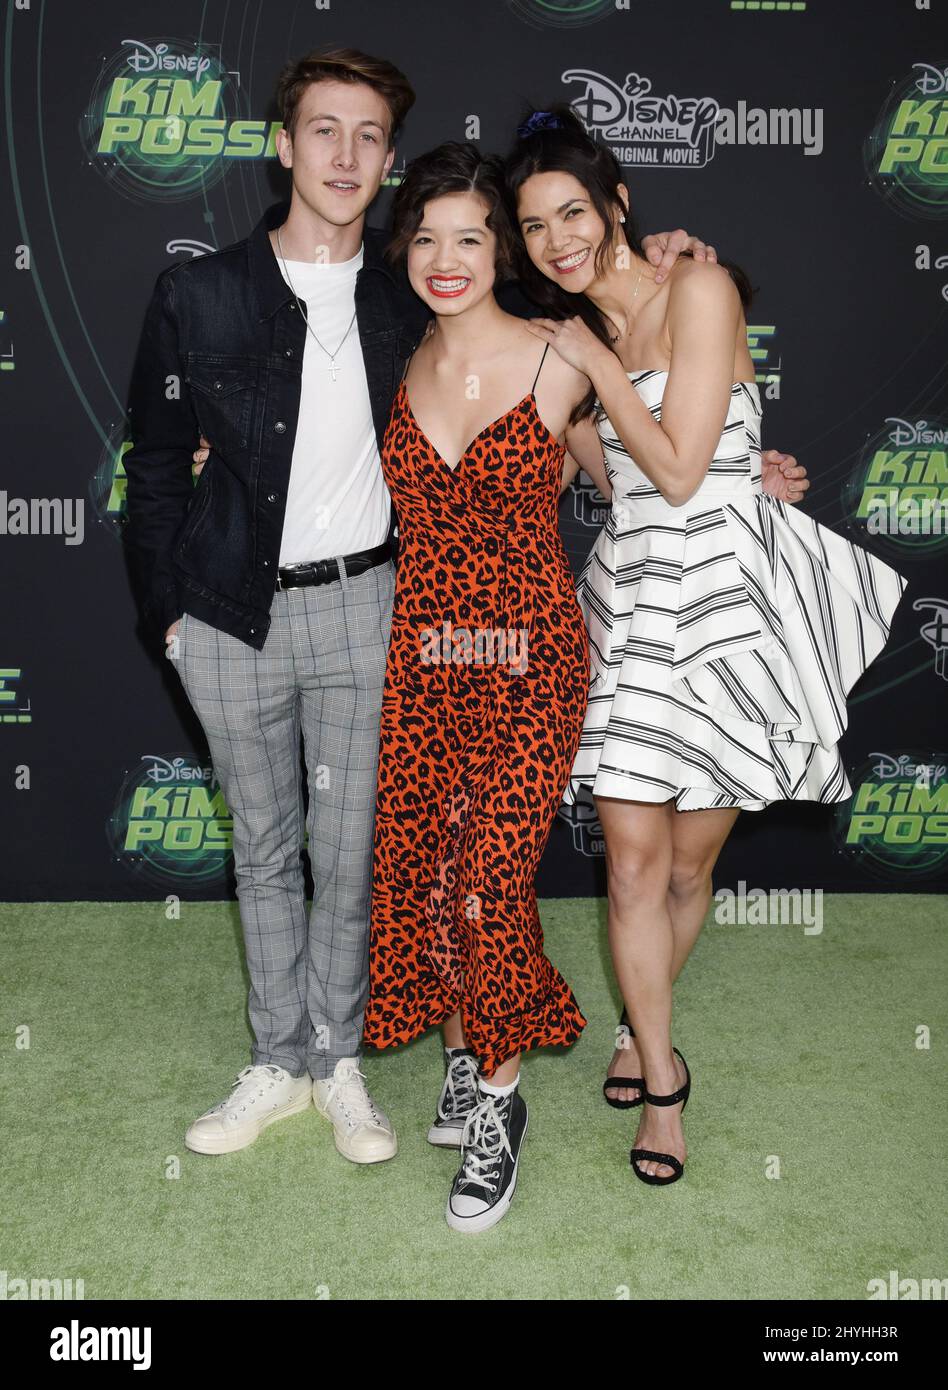 Luke Mullen, Peyton Lee and Lilan Bowden at Disney Channel's 'Kim Possible' Premiere held at the Television Academy Stock Photo